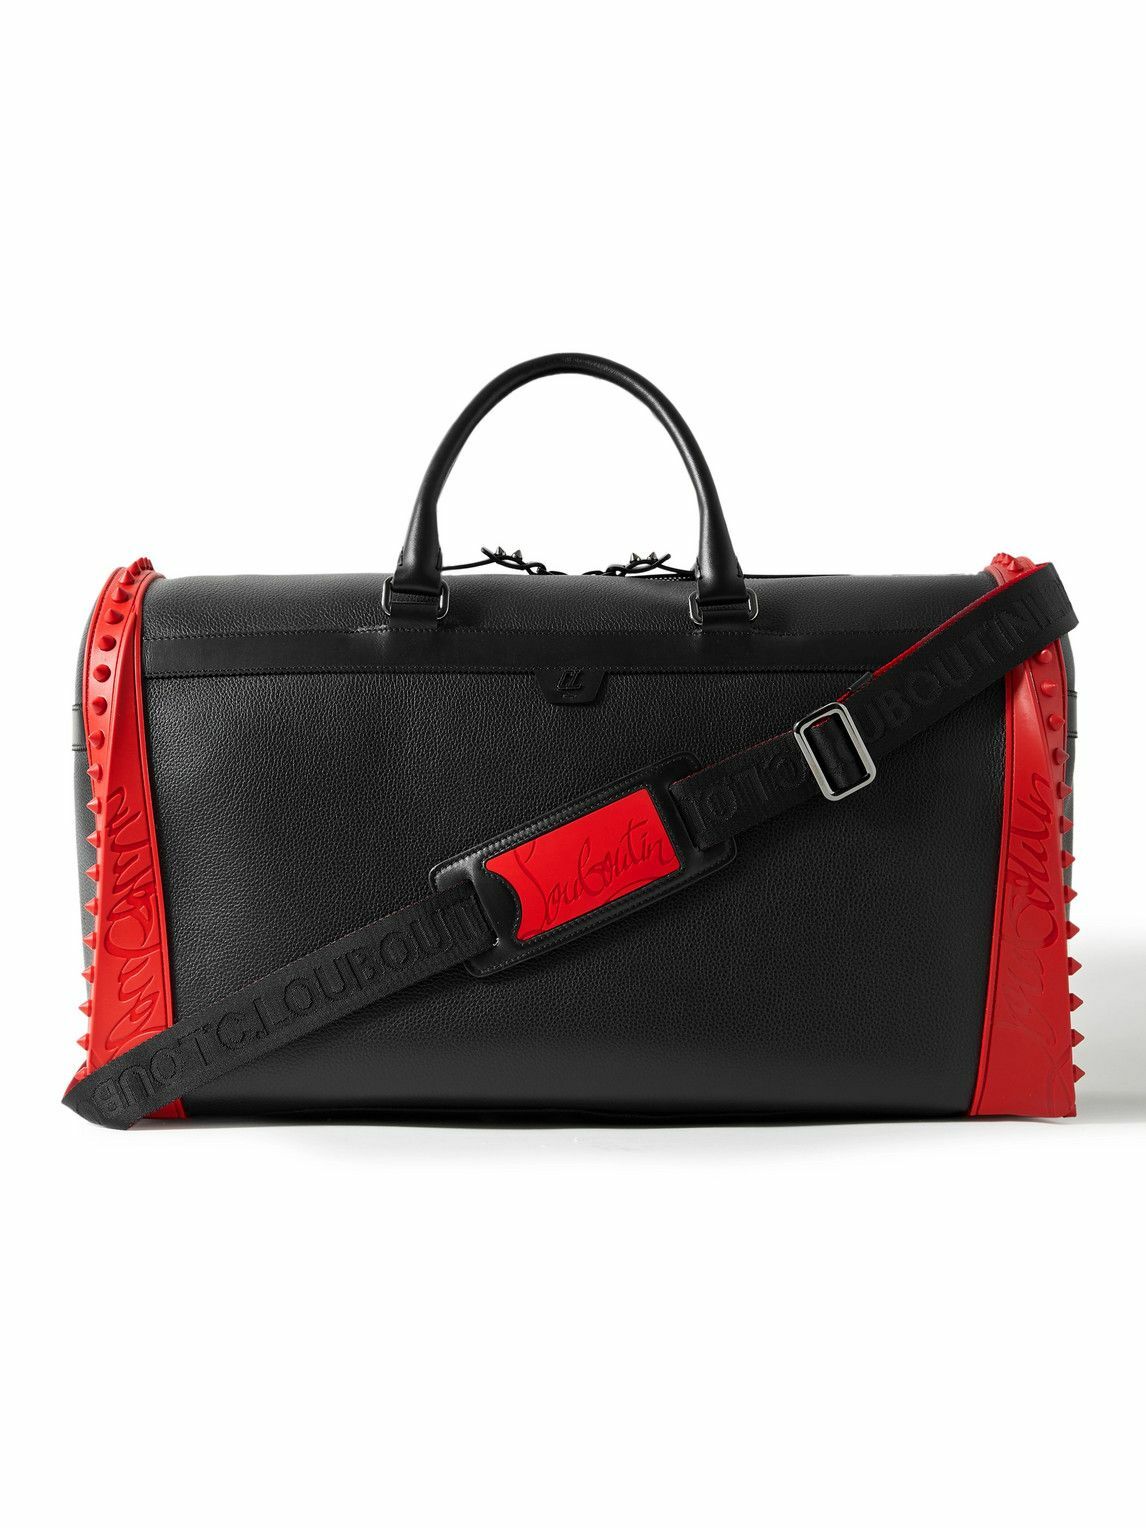 Photo: Christian Louboutin - Sneakender Studded Rubber-Trimmed Full-Grain Leather Weekend Bag